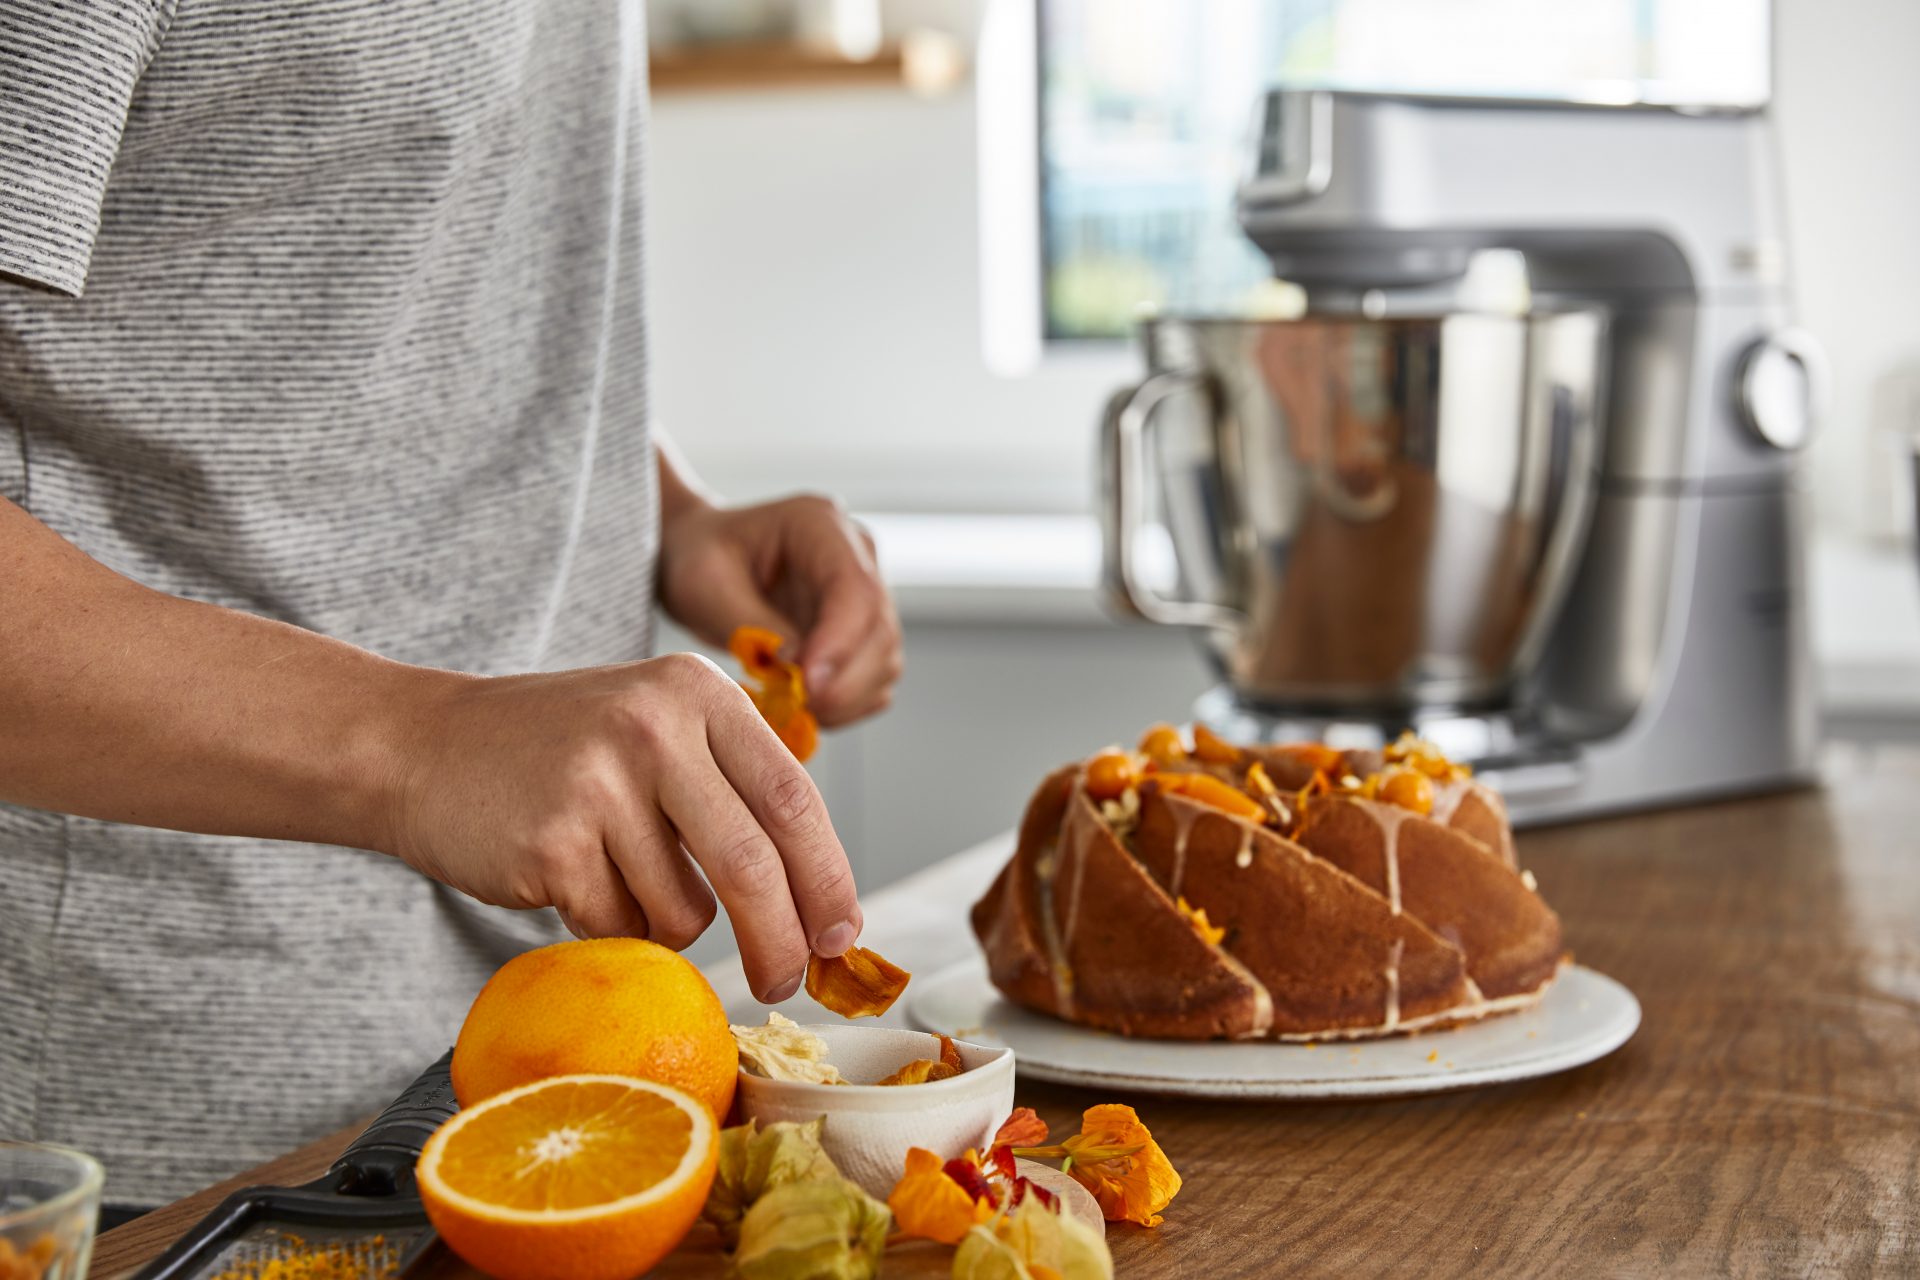 Kenwood Titanium Chef Baker XL with a citrus bundt cake in the foregroung